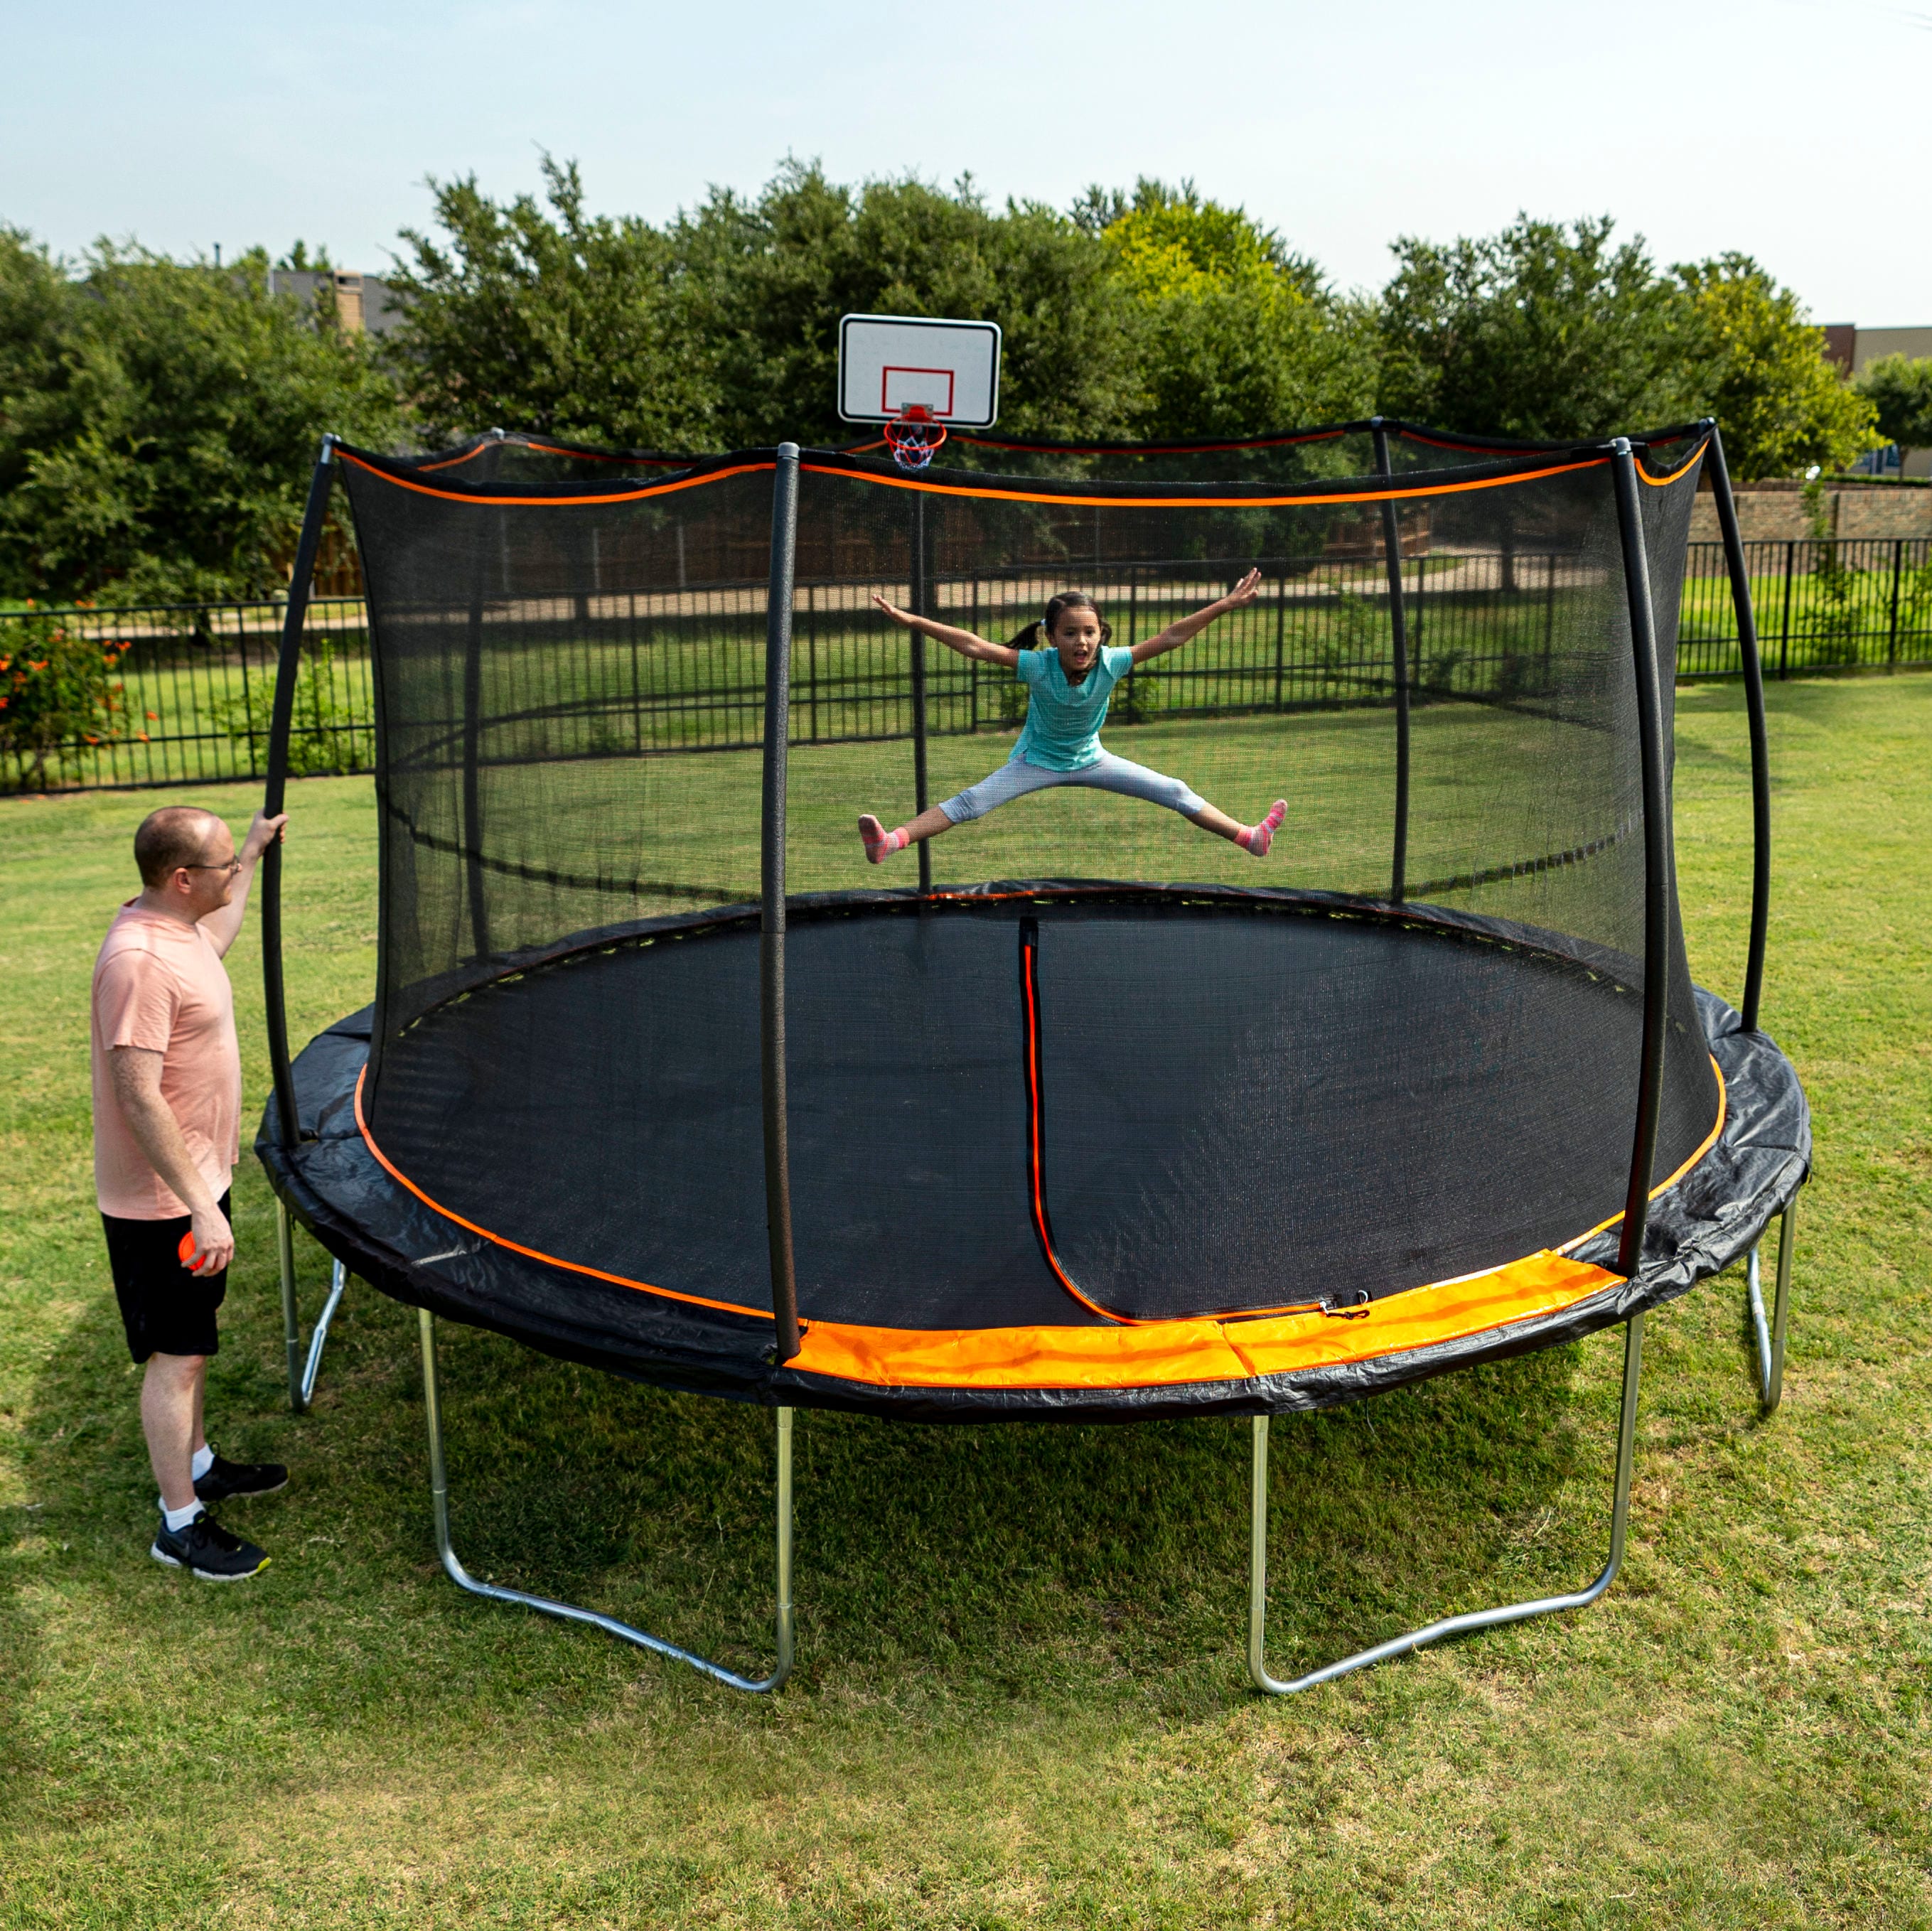 How Many Feet around is a 15 Foot Trampoline 